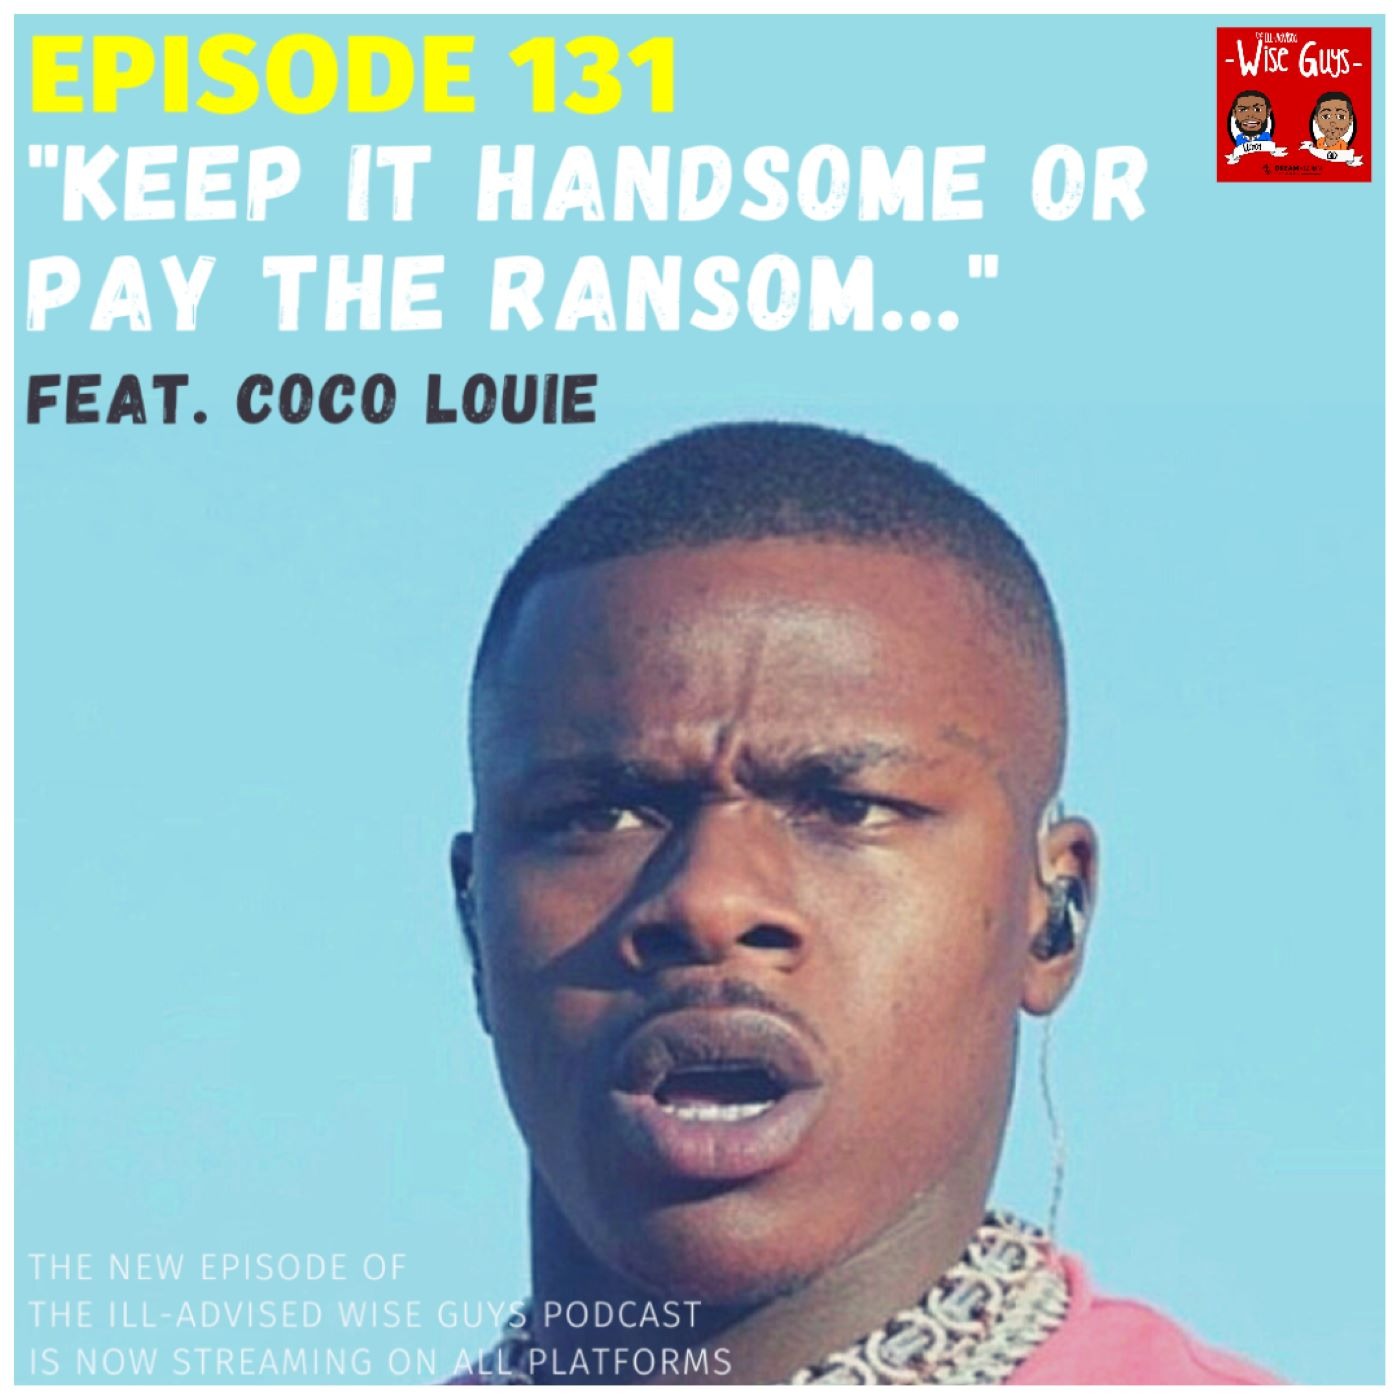 Episode 131 - "Keep It Handsome Or Pay The Ransom..." (Feat. Coco Louie) Image